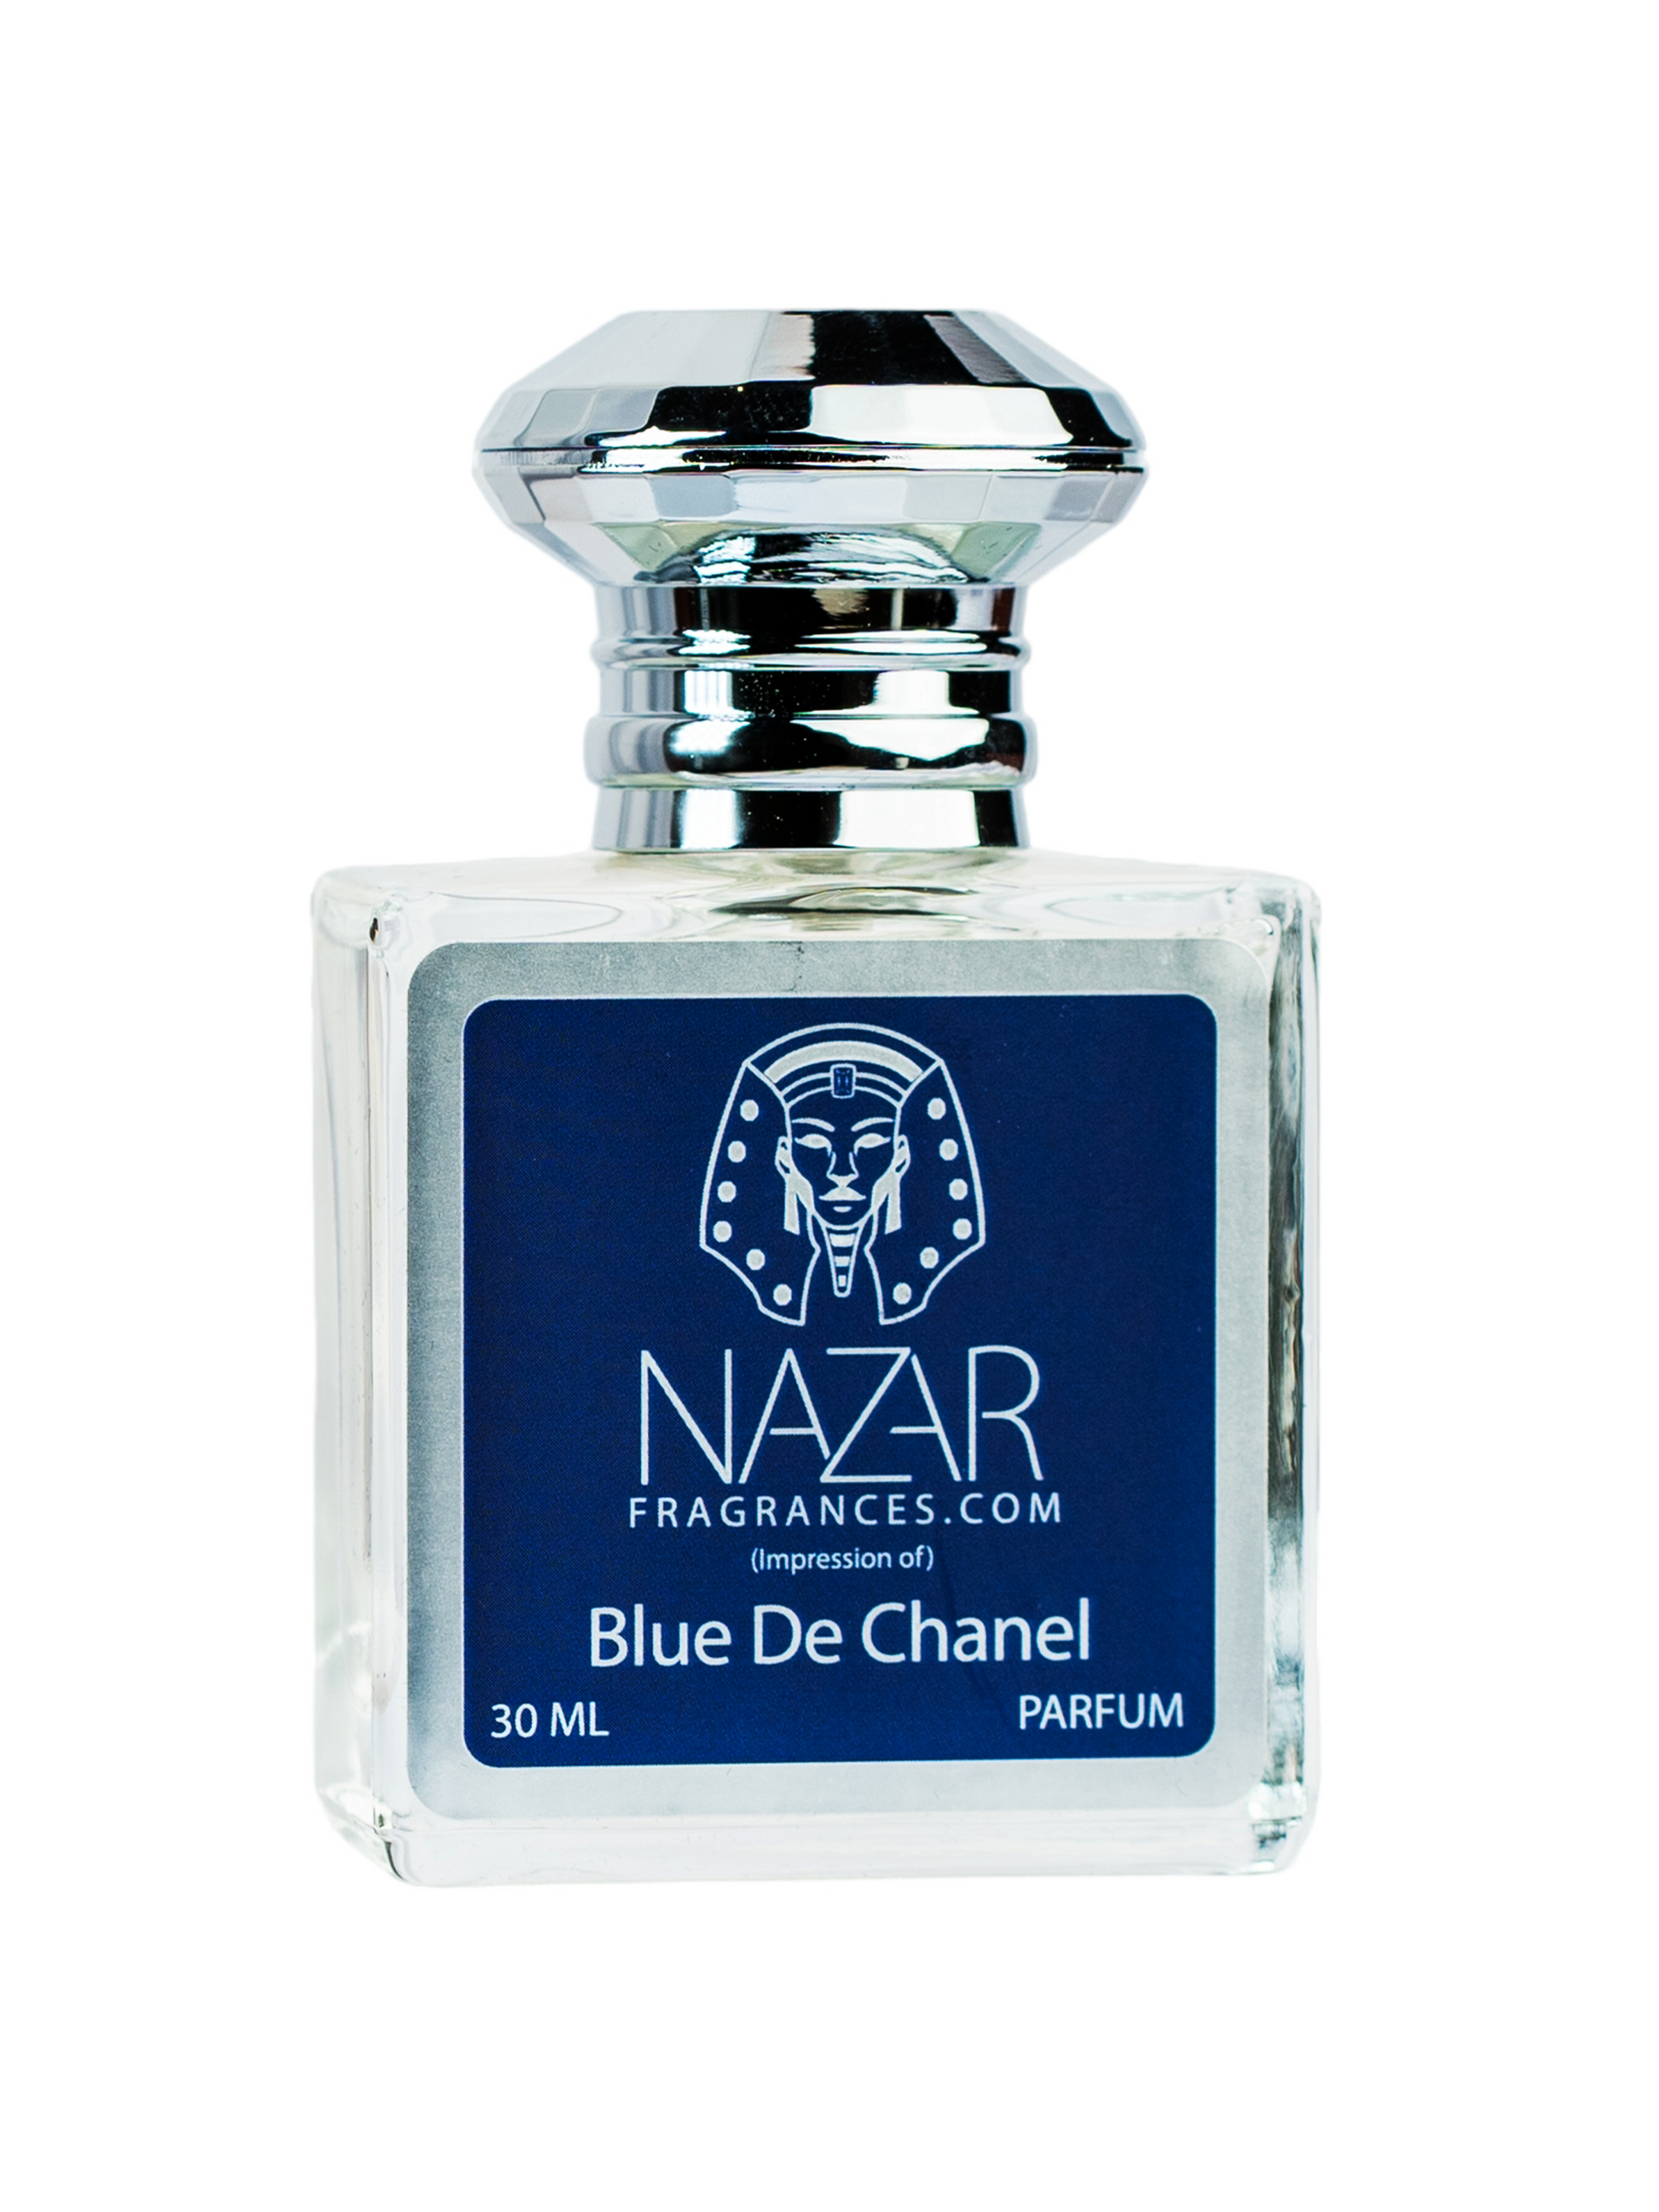 Chanel - Coco Mademoisel Intens for Women